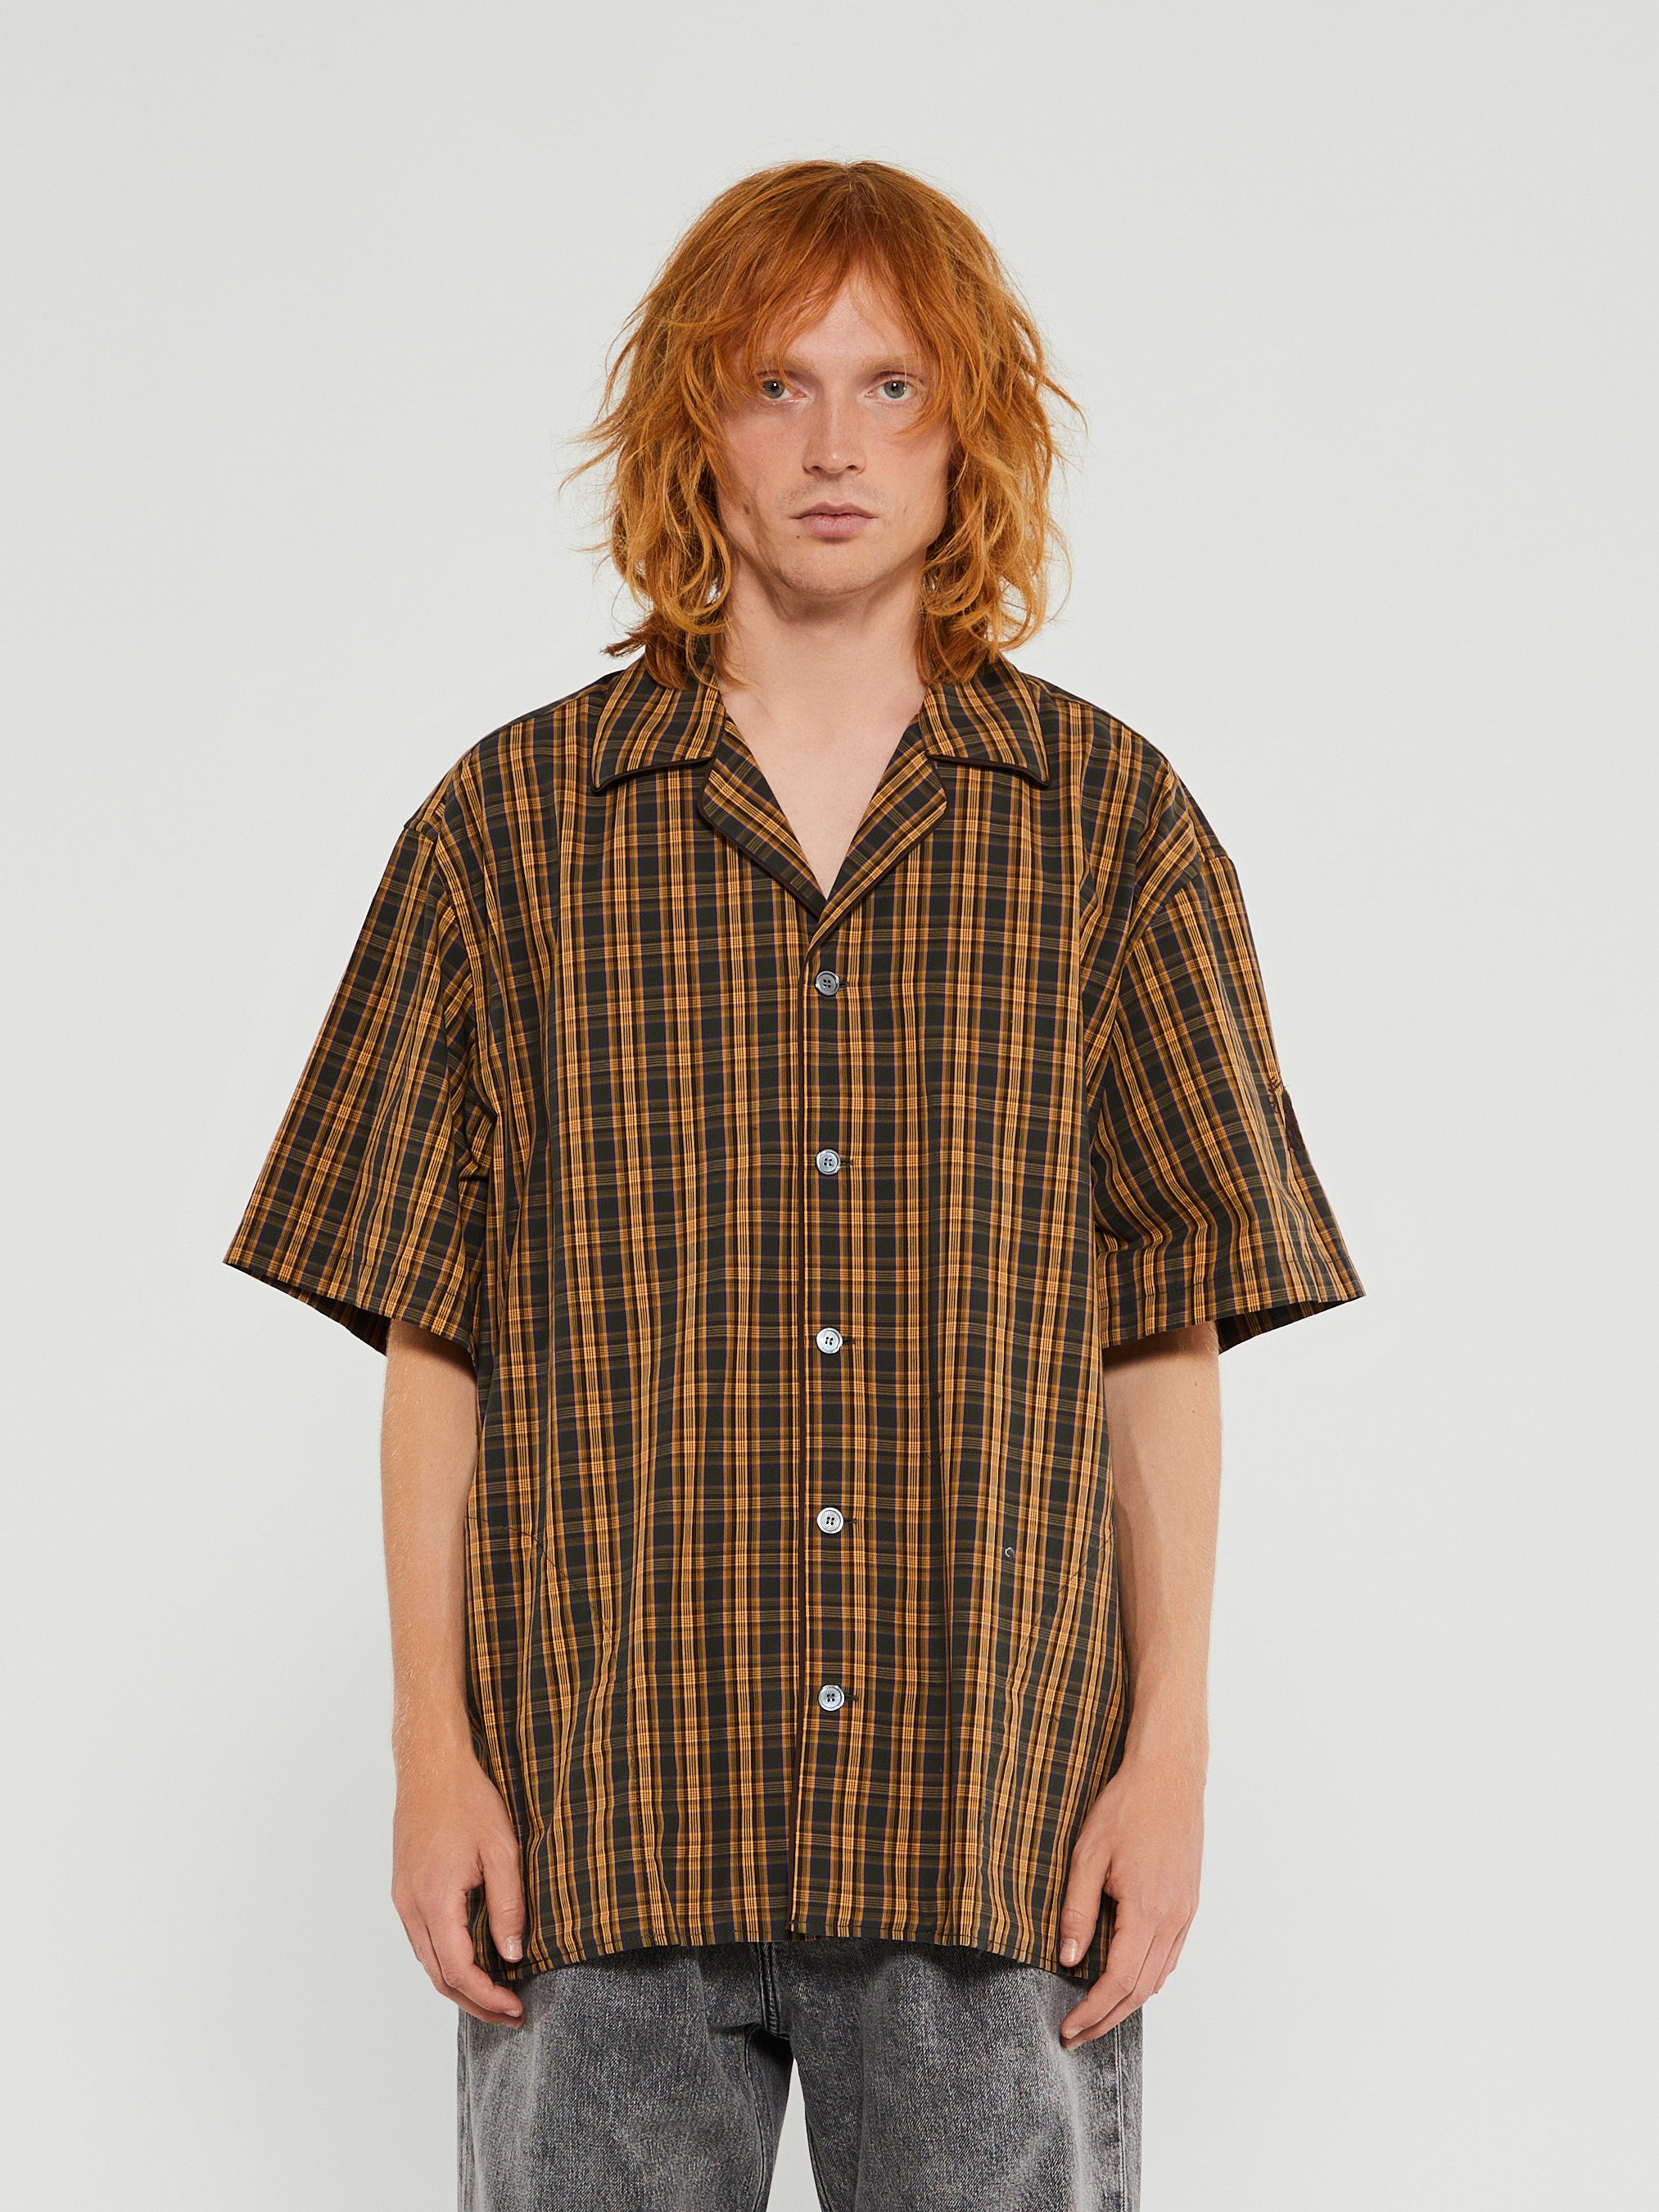 Acne Studios - Short Sleeve Button-Up Shirt in Brown and Green